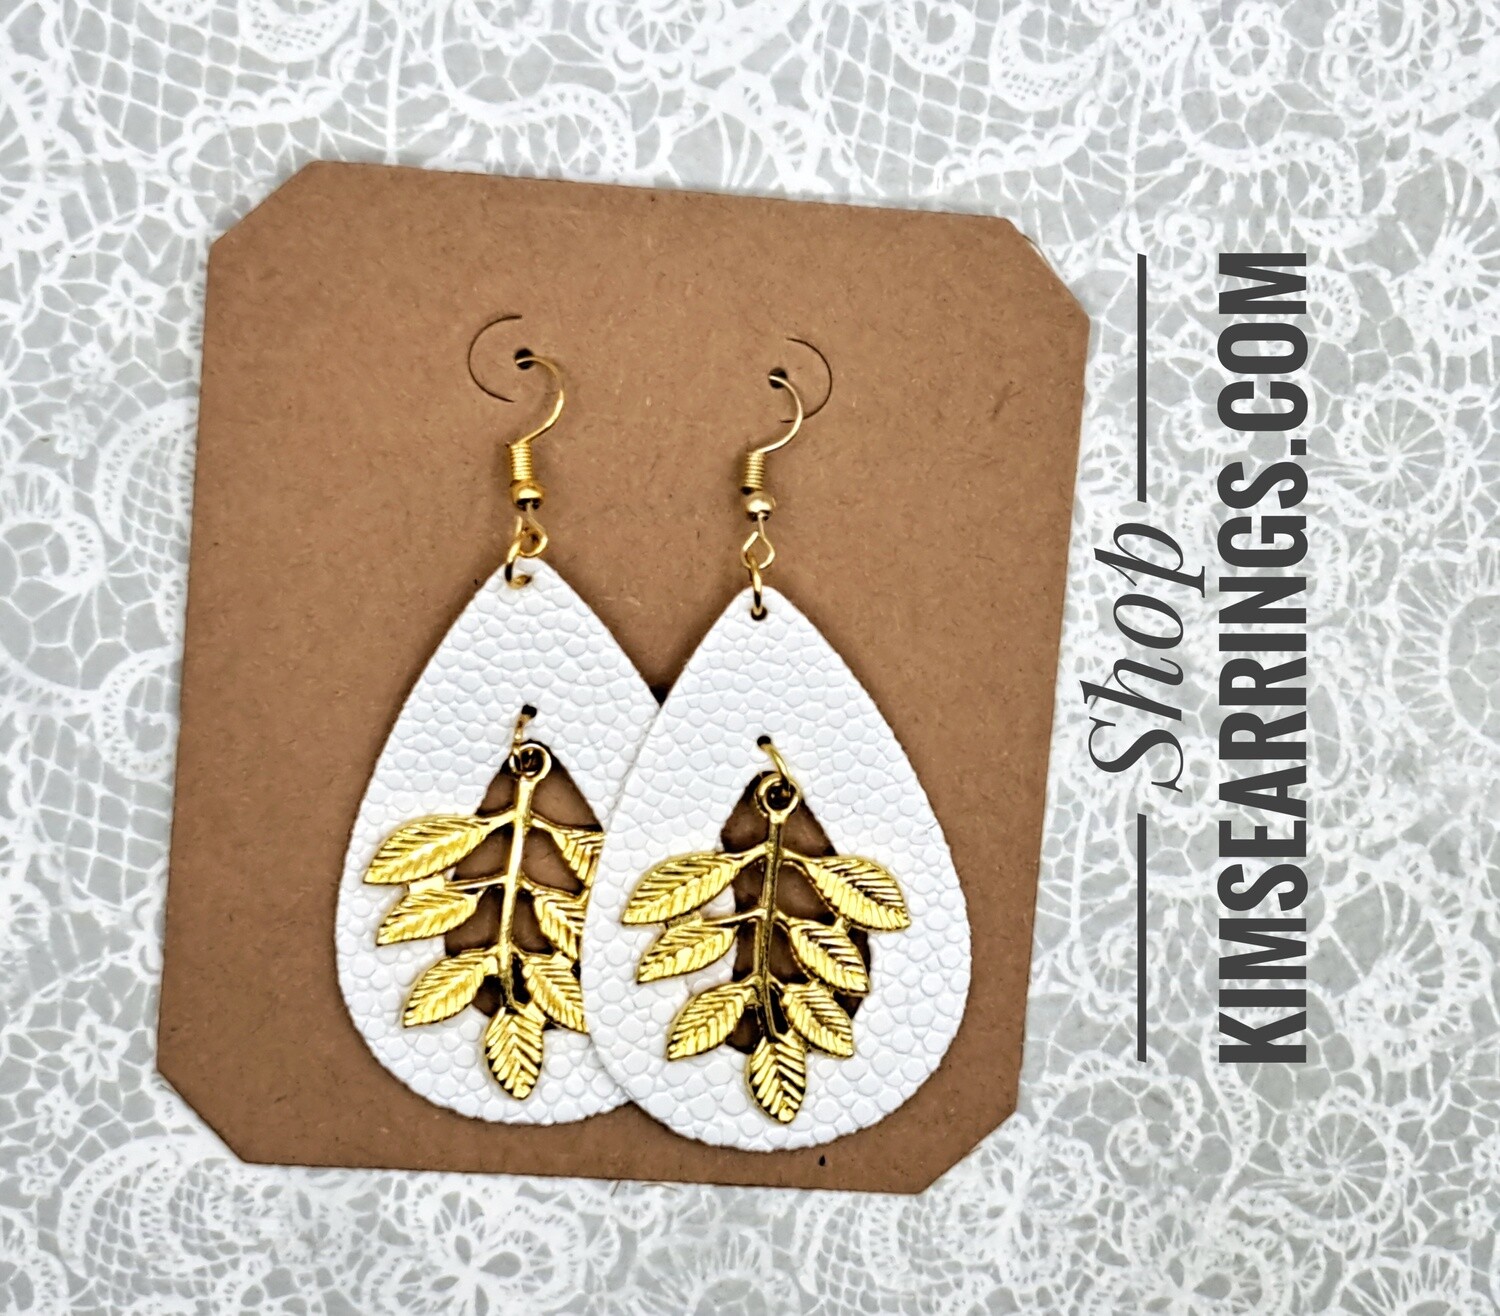 White Faux Hoops with Gold Leaf Charms Earrings